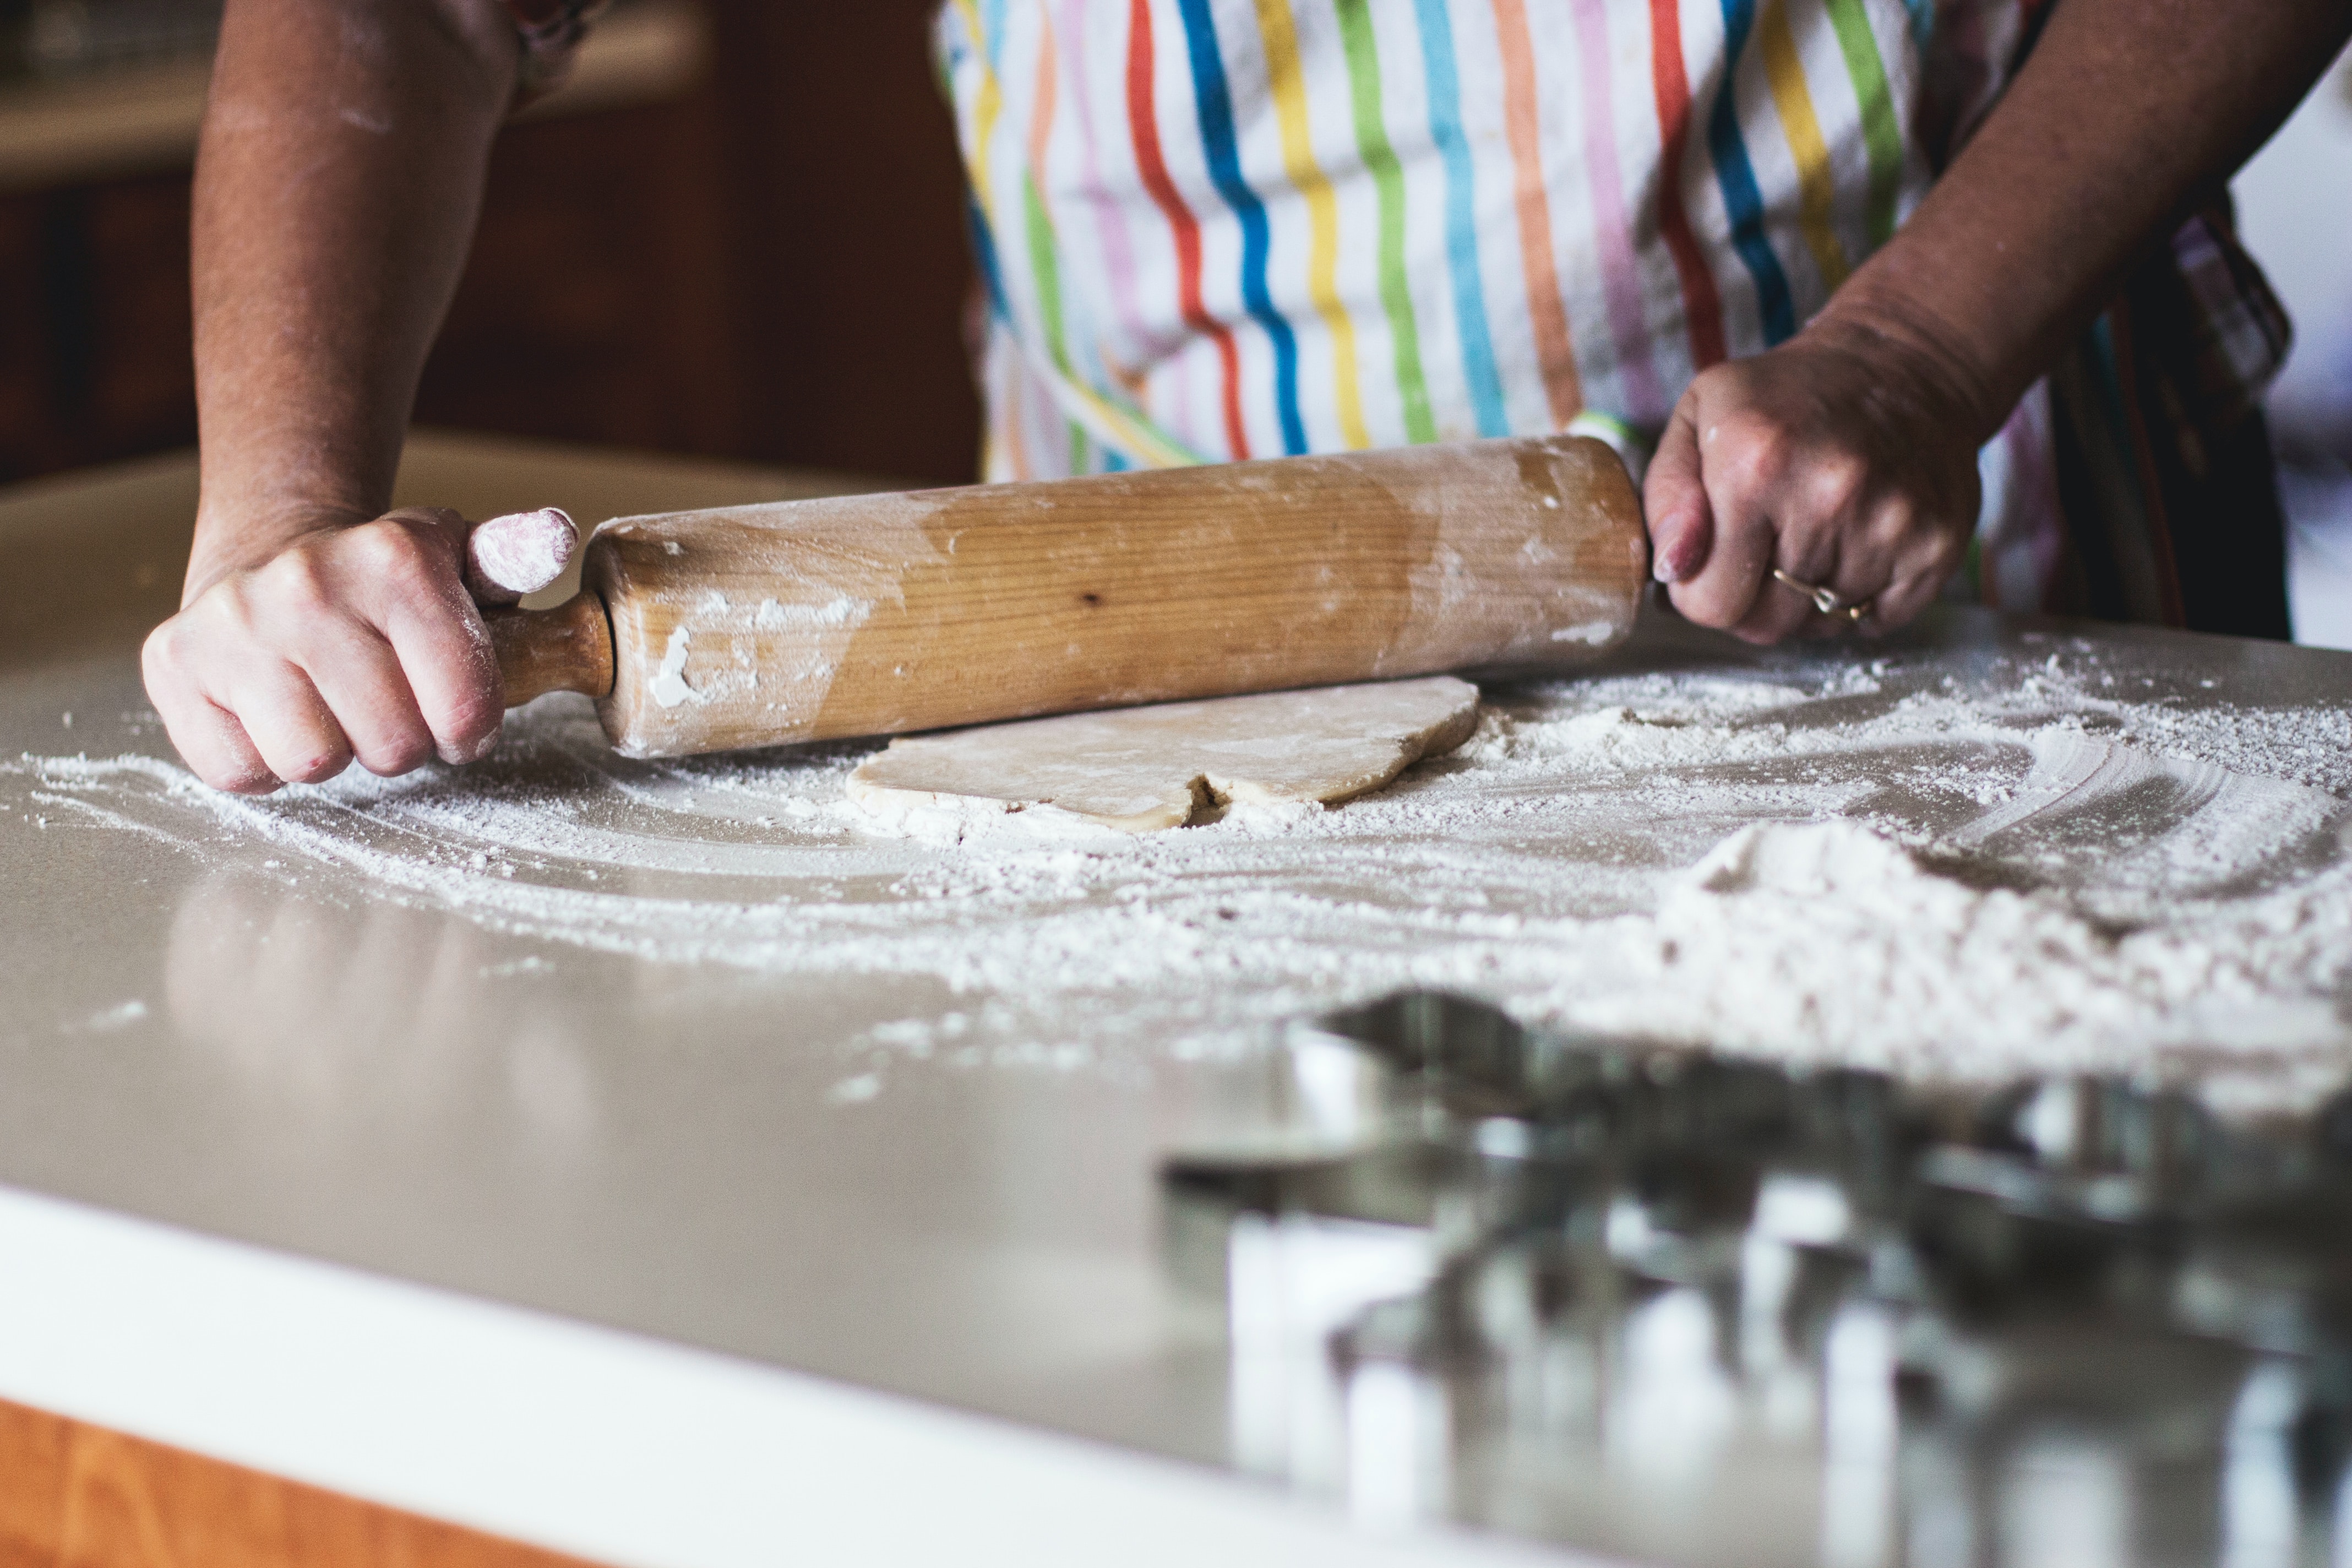 A person with light tan skin using a rolling pin on dough and flour; they are wearing a fun, rainbow striped apron.